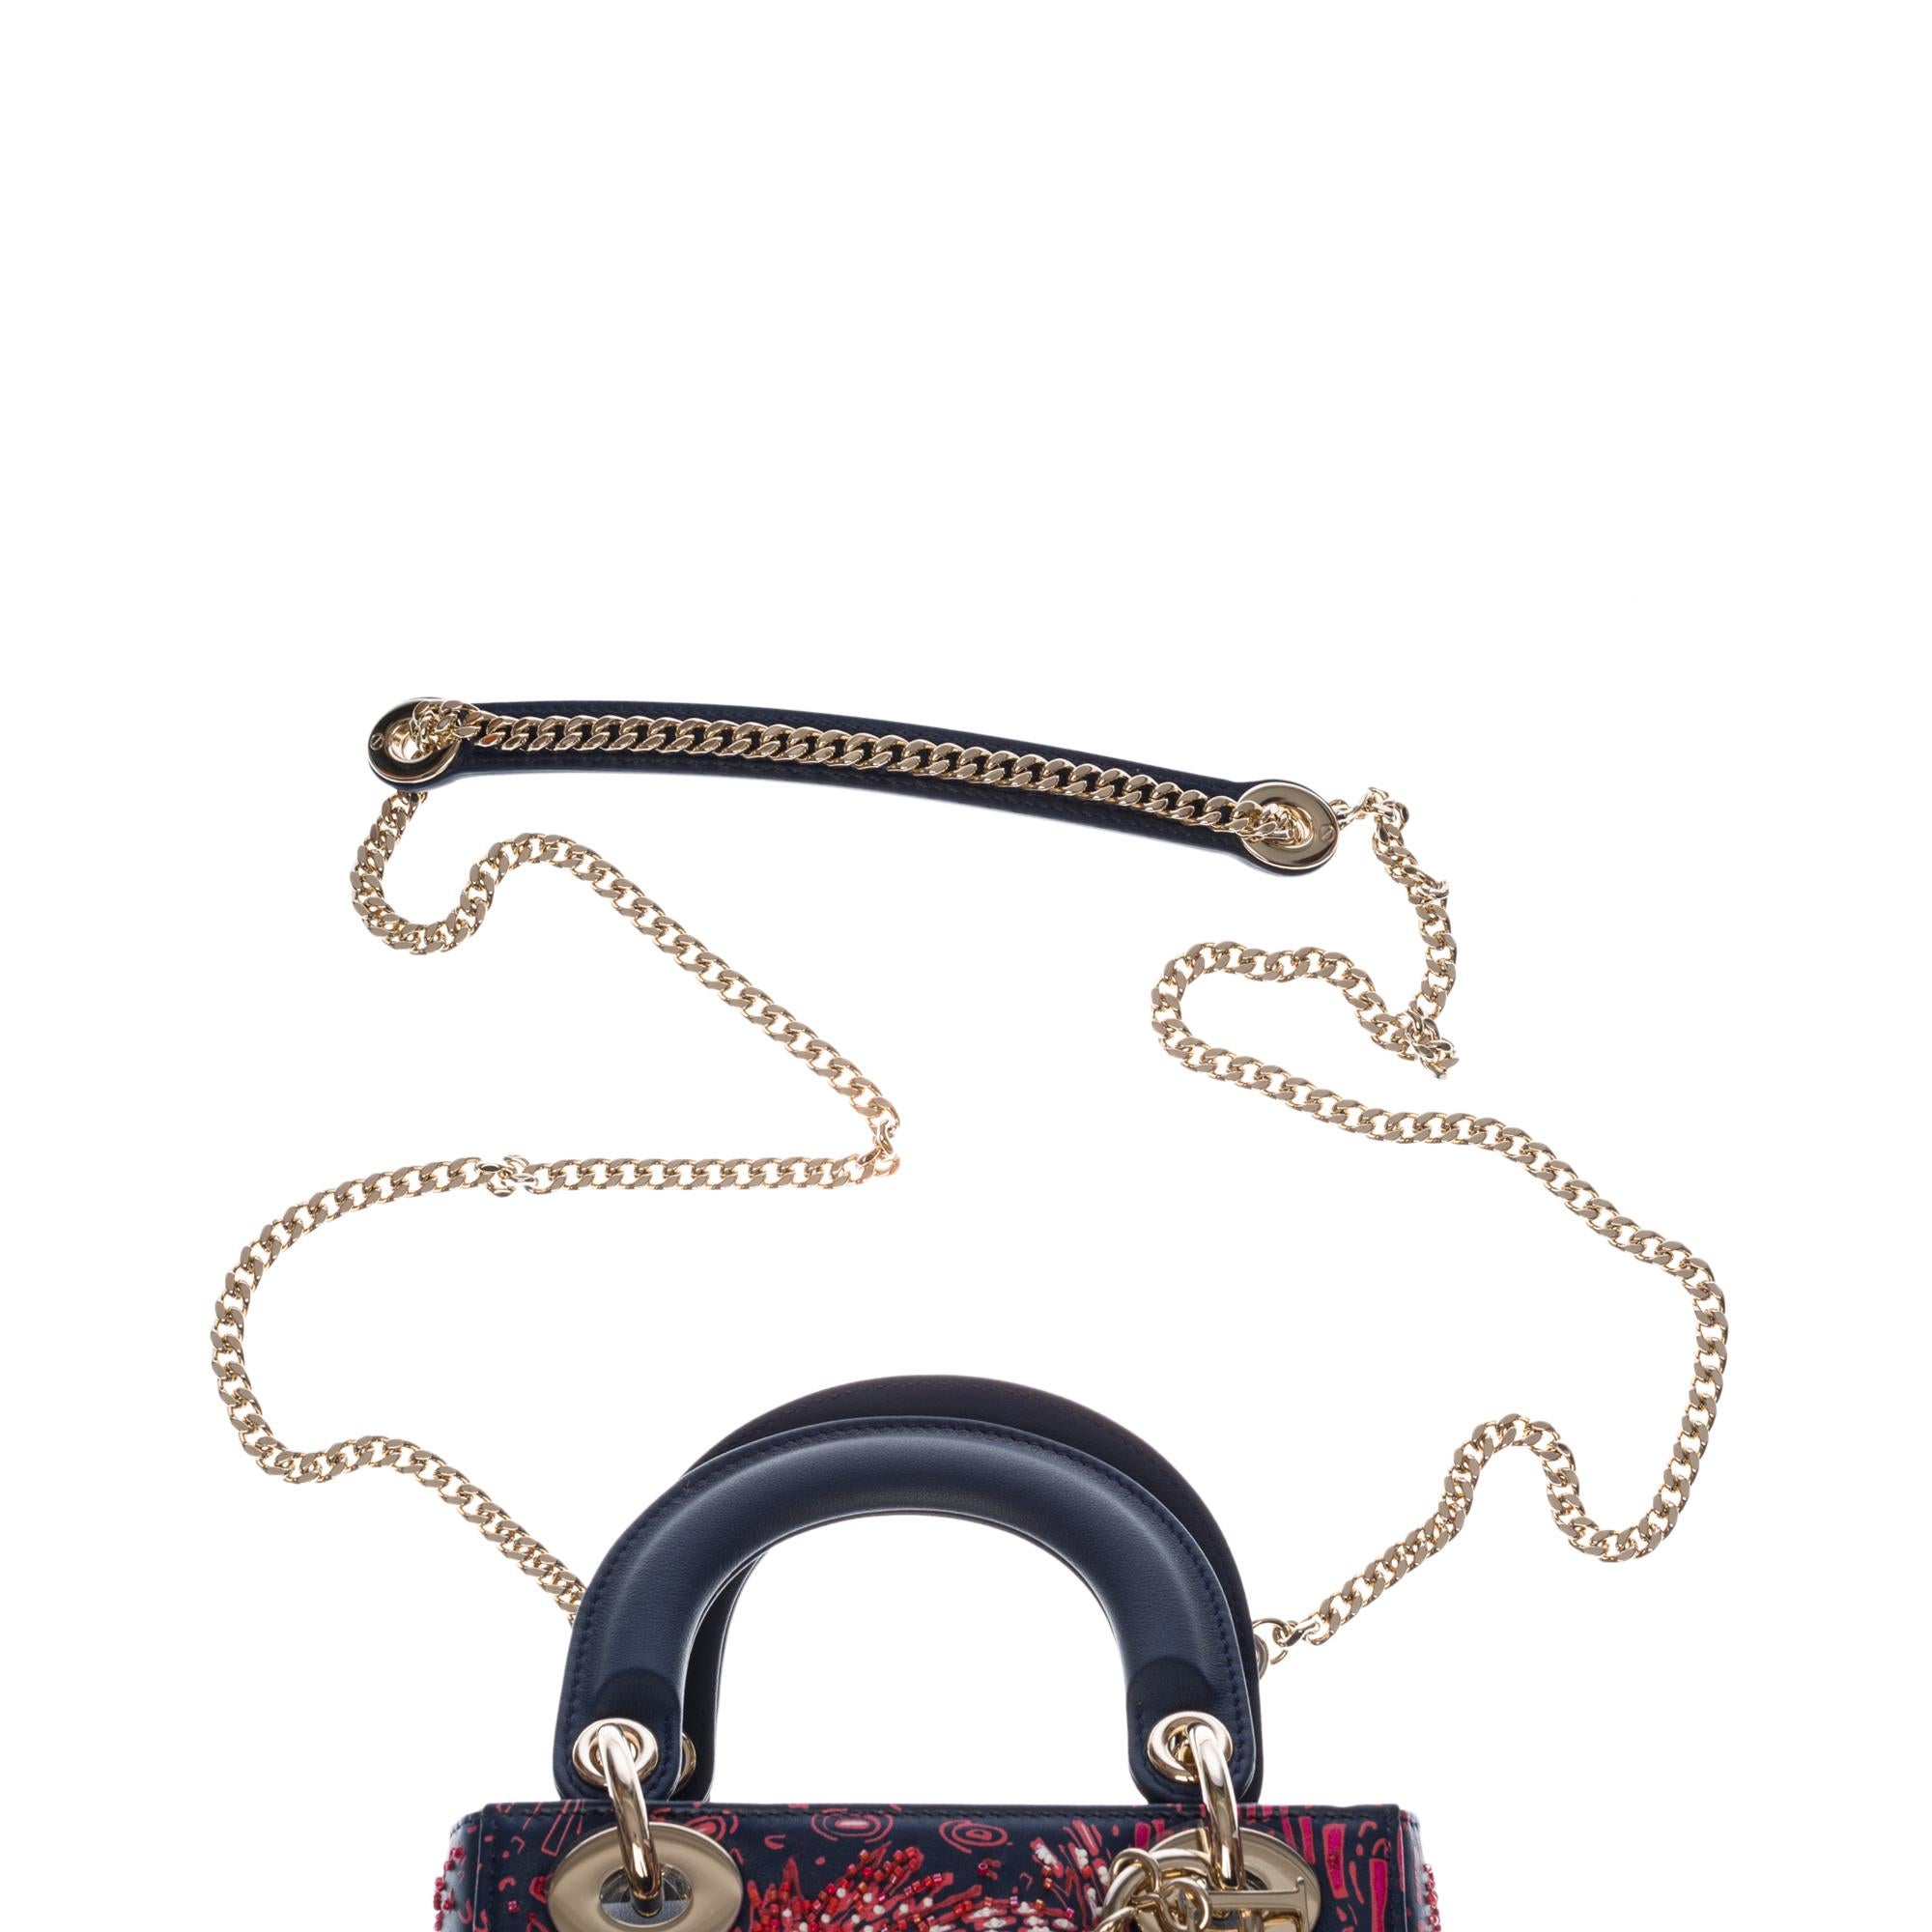 Women's Marrakesh 2020 Limited Edition Lady Dior Mini in navy blue leather with beads 